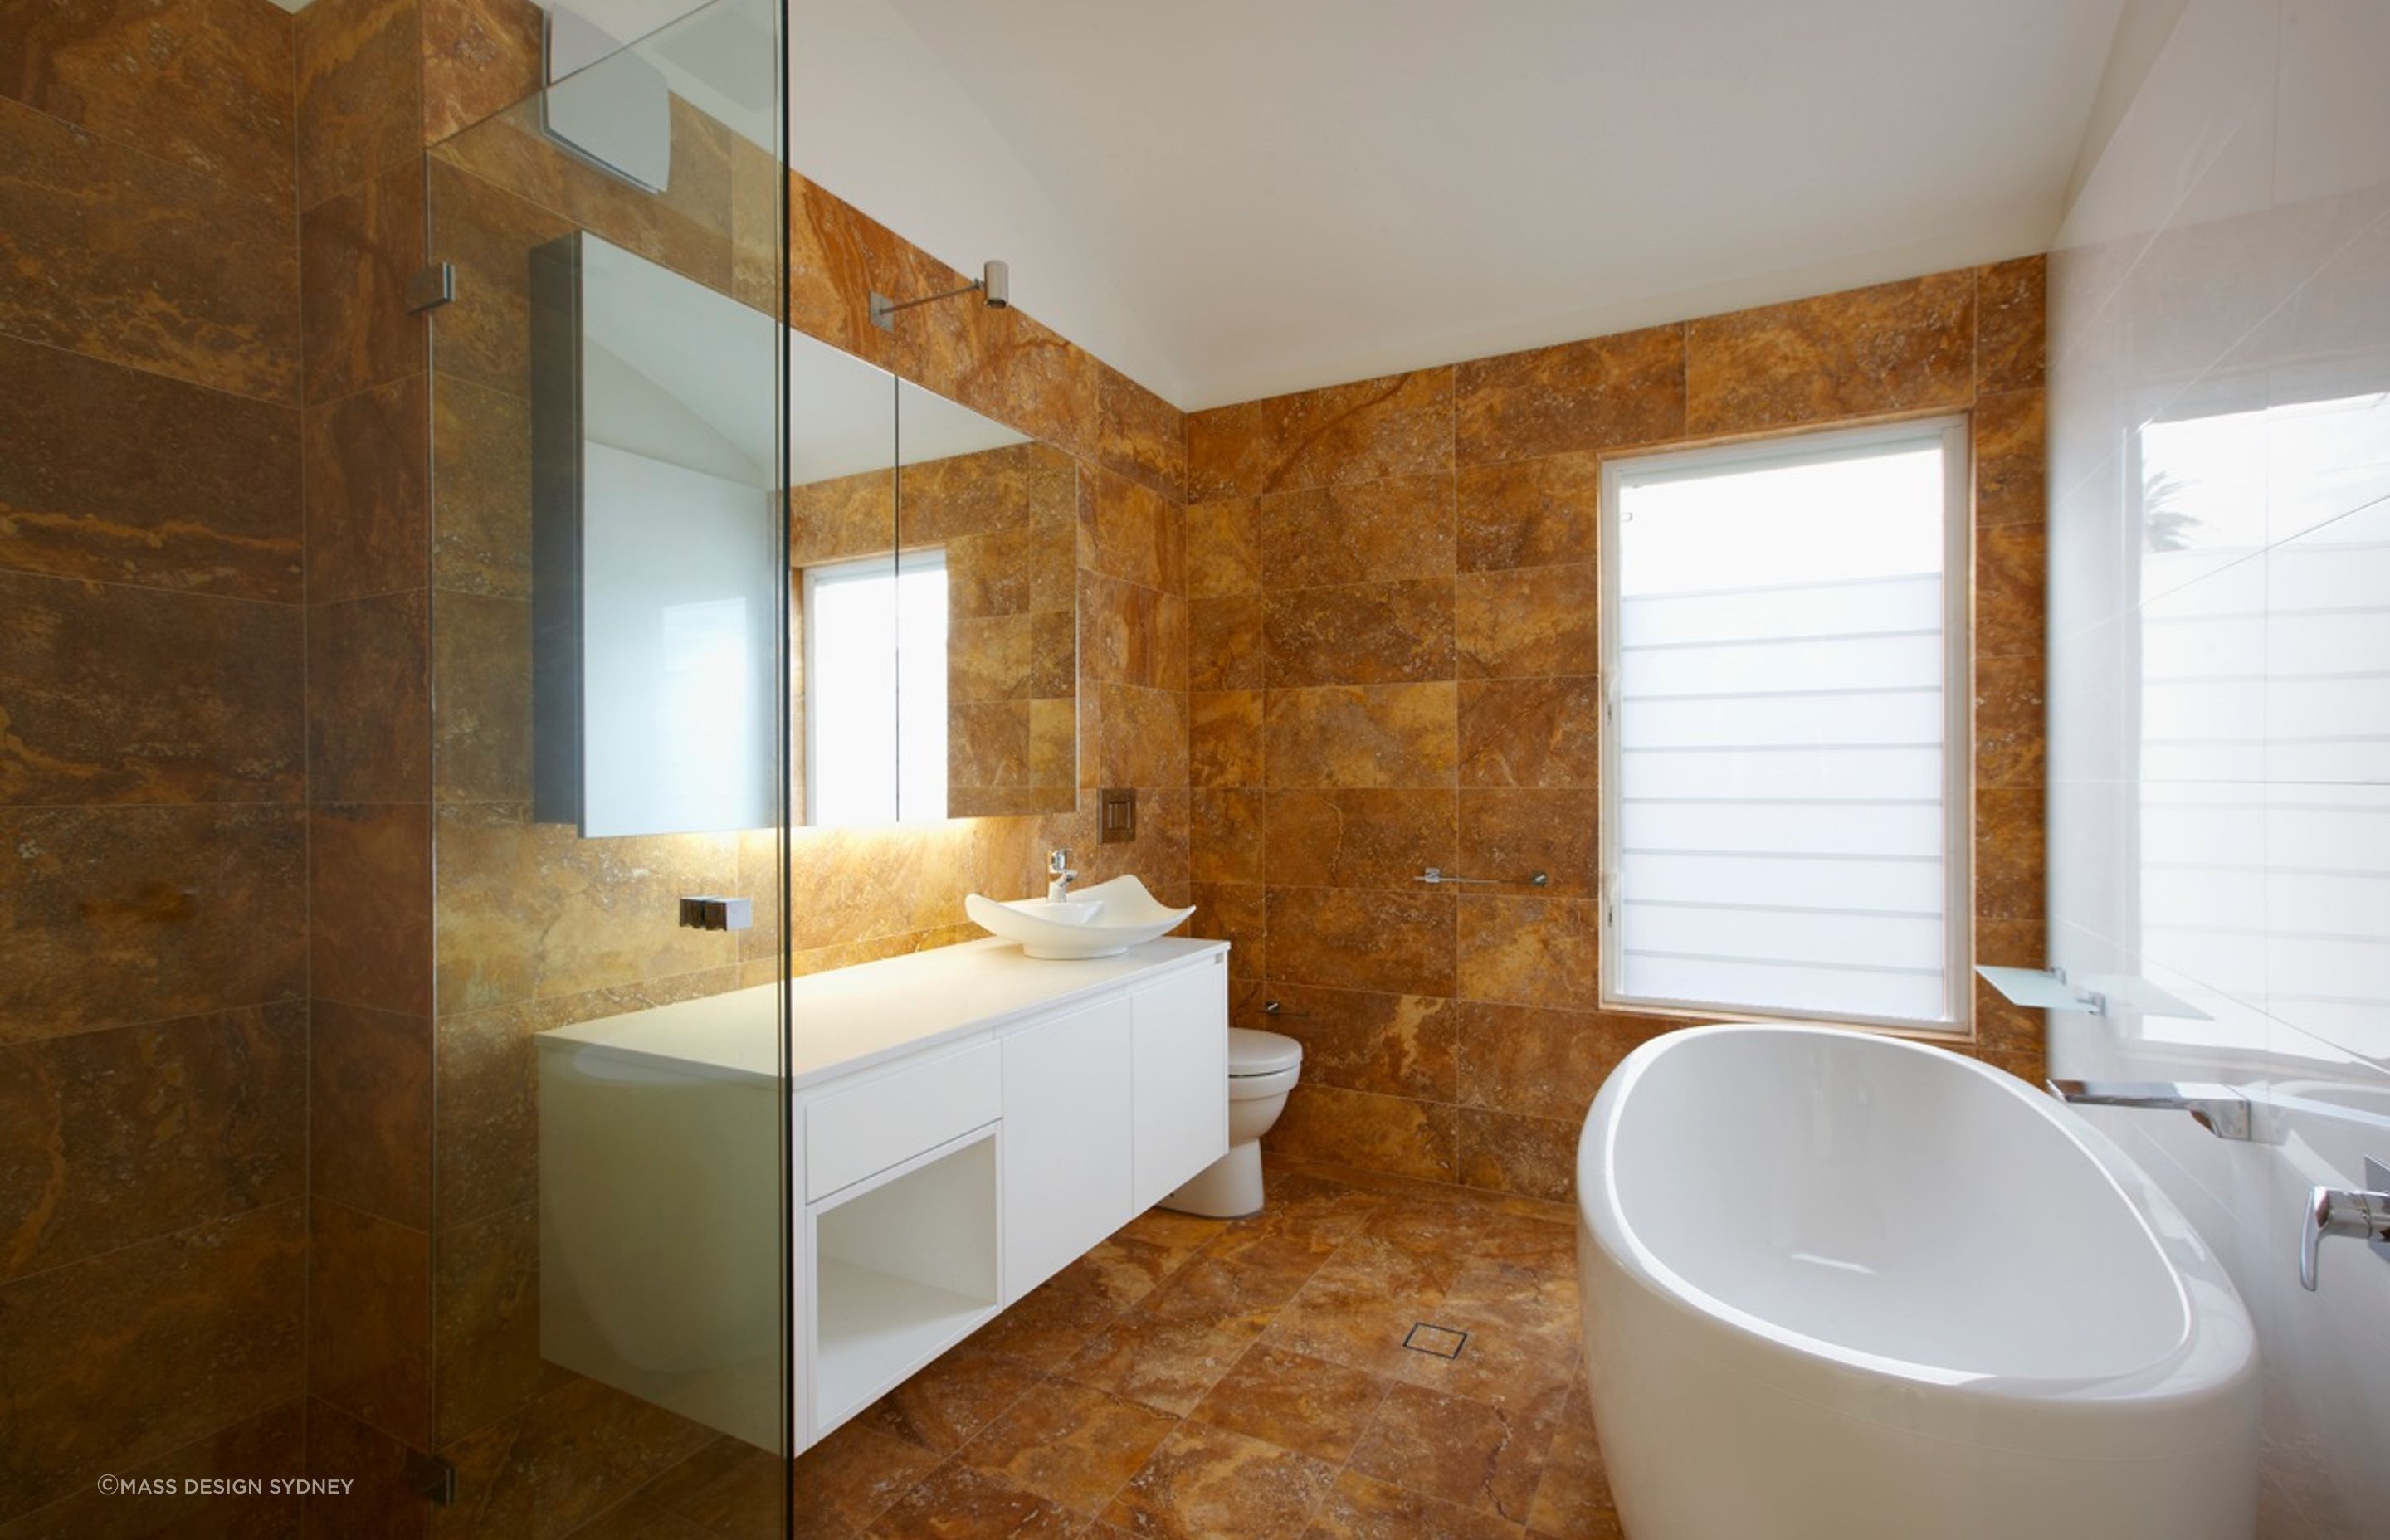 Private residence bathroom in North Manly - Photography: Lawson &amp; Lovell Building Services